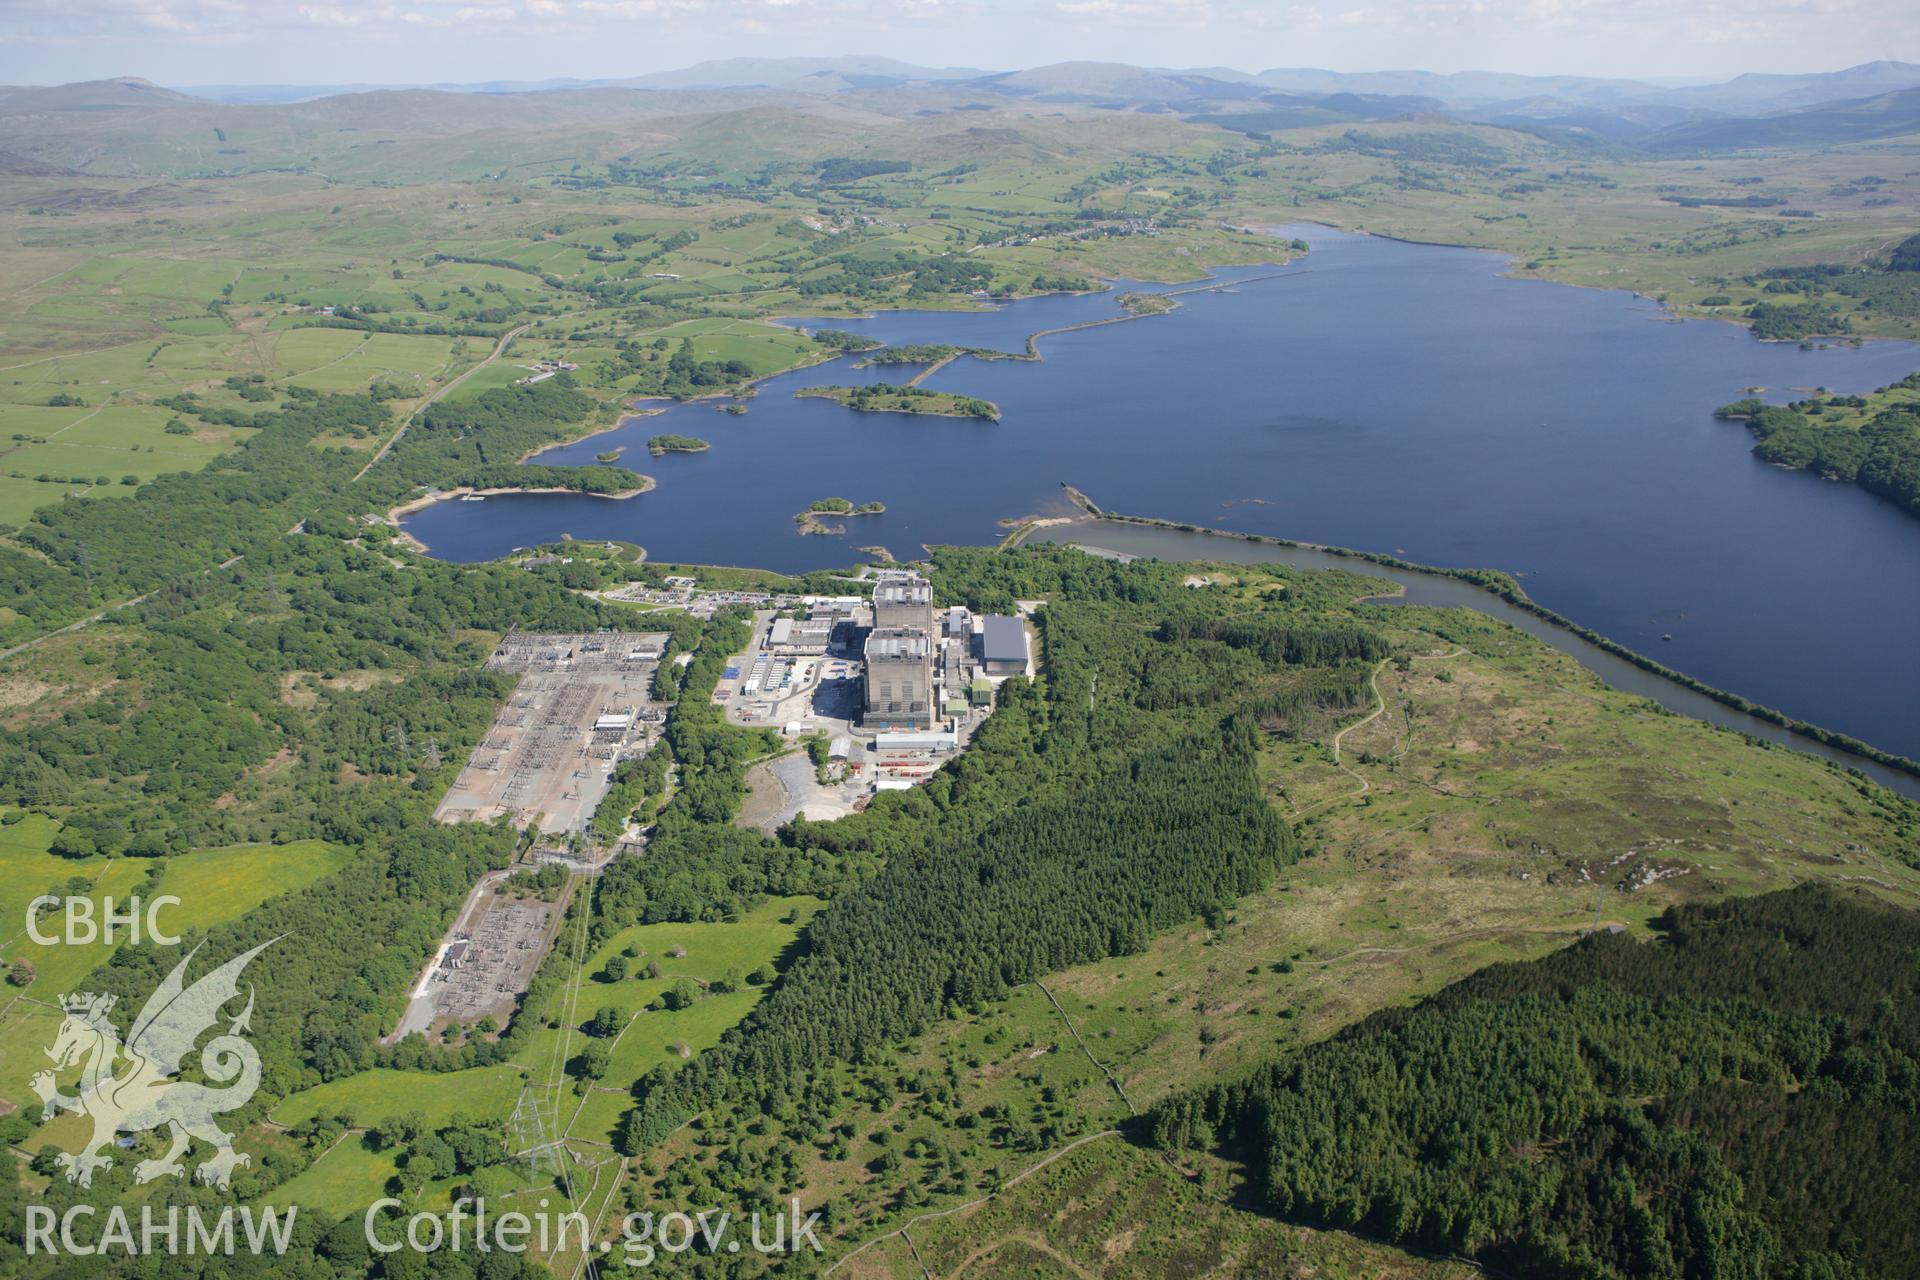 RCAHMW colour oblique photograph of Trawsfynydd Power Station. Taken by Toby Driver on 16/06/2010.